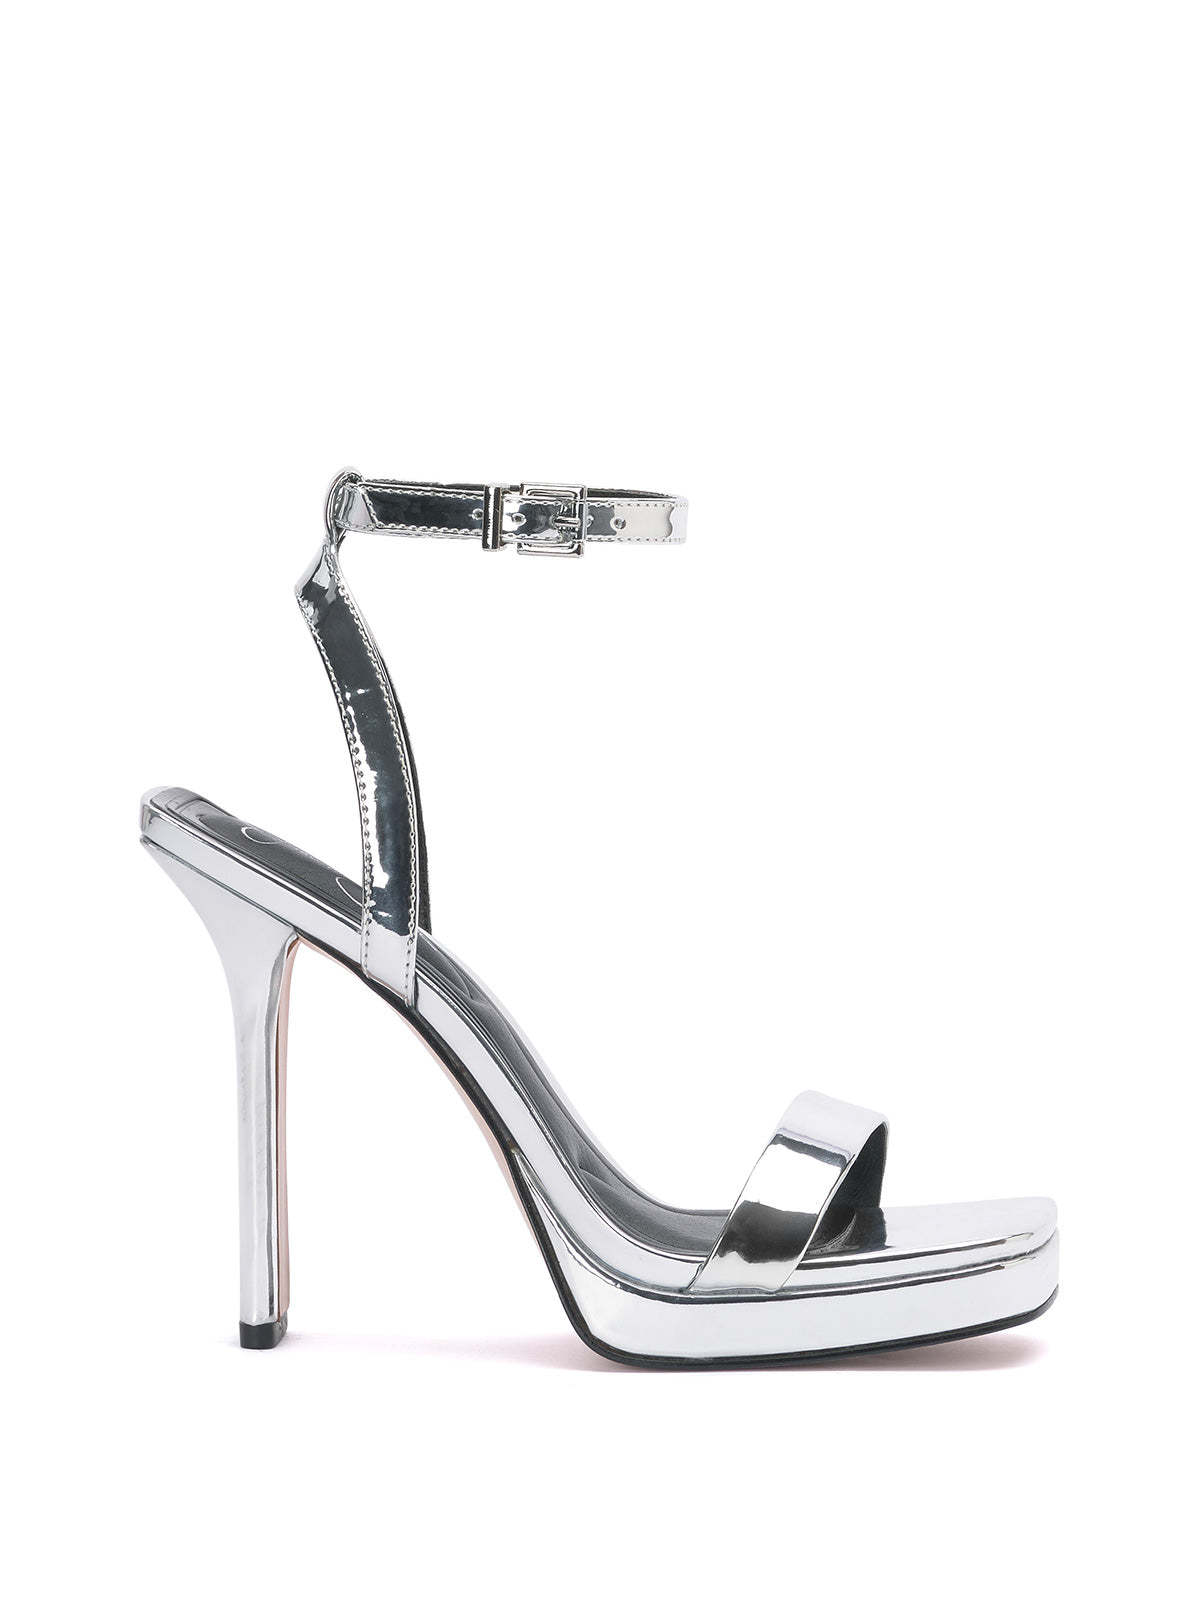 Adonia High Heel in Silver – Jessica Simpson